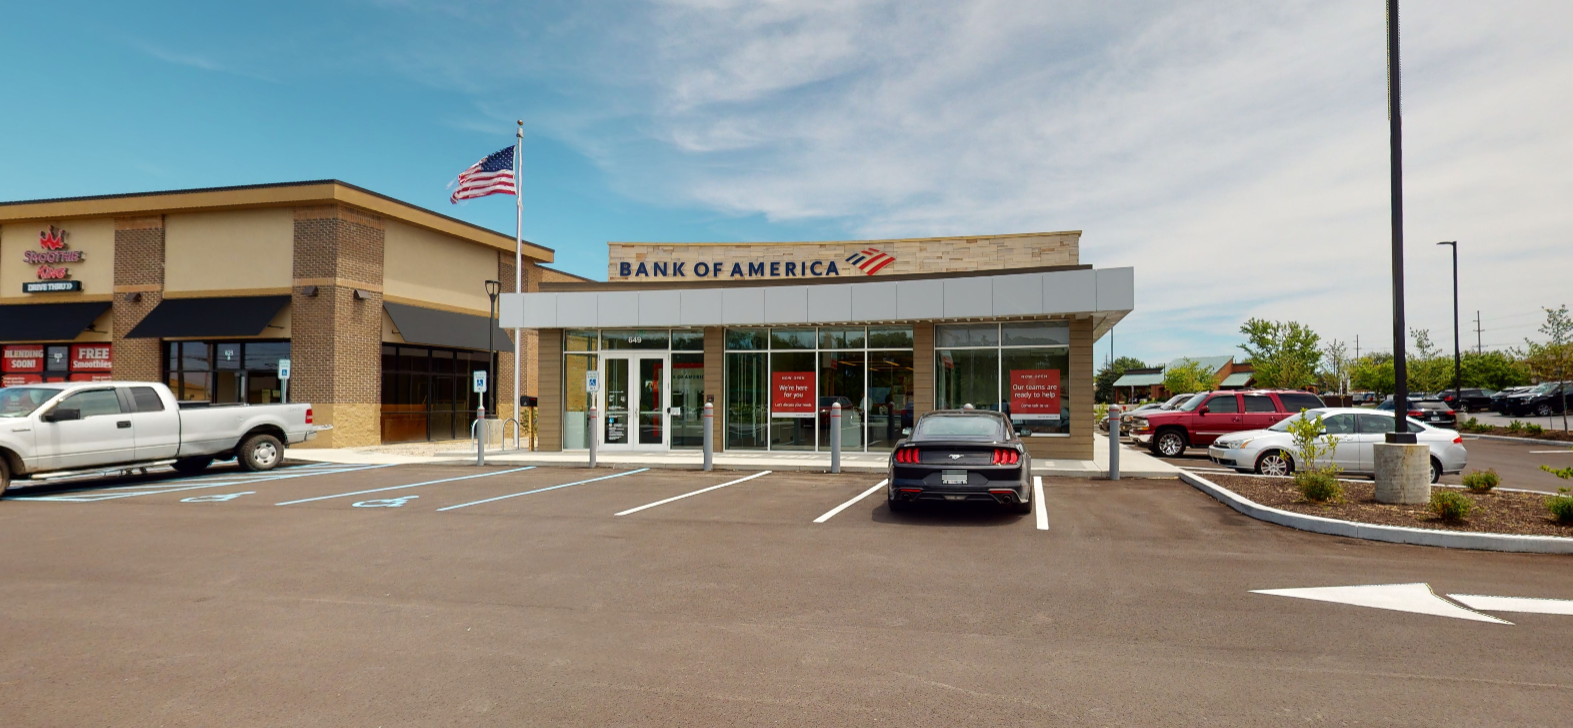 Bank of America financial center with drive-thru ATM | 649 S State Rd 135, Greenwood, IN 46142